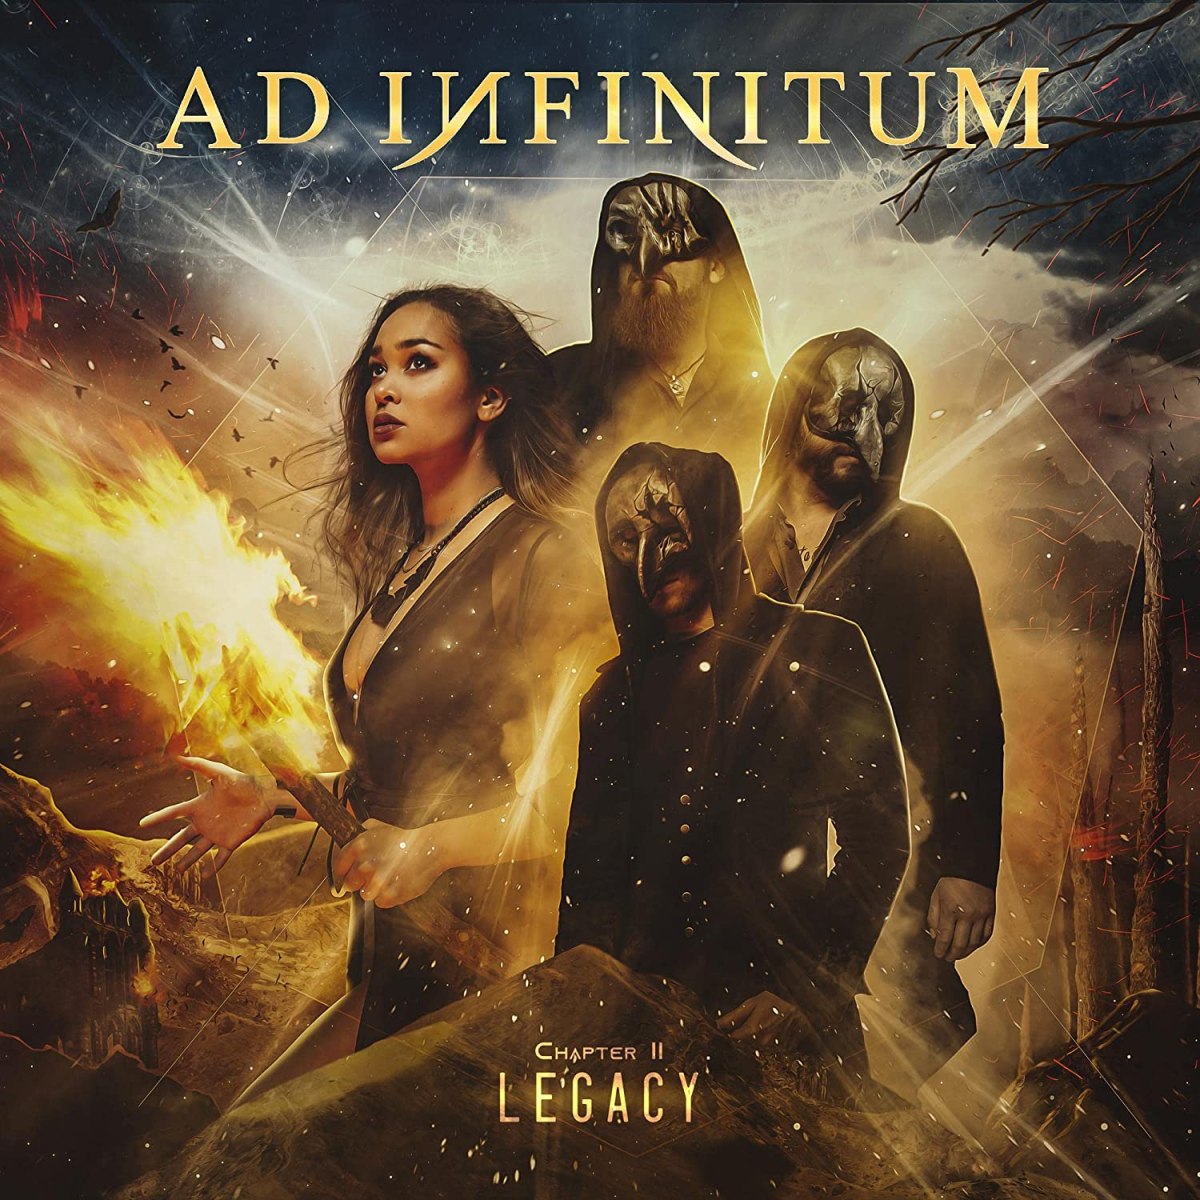 ‘Ad Infinitum.  ‘Chapter II, Legacy’. Album review.